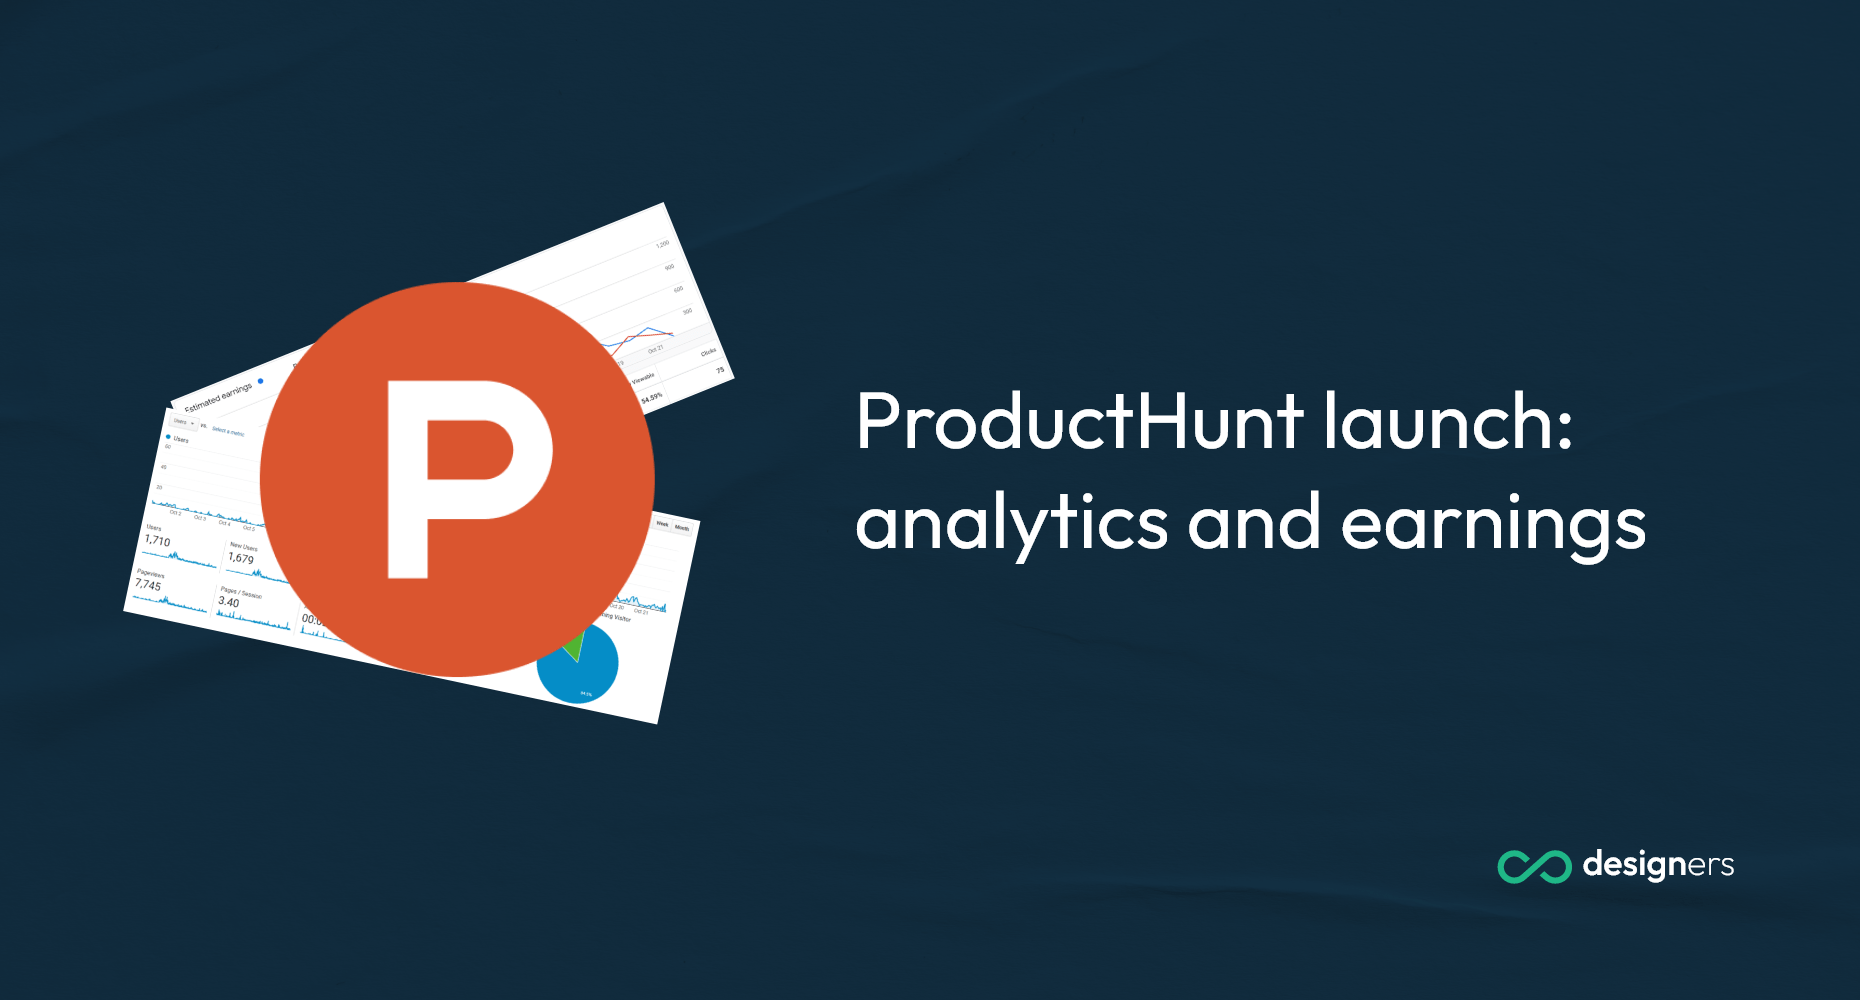 8designers' ProductHunt Launch: Analytics and Earnings